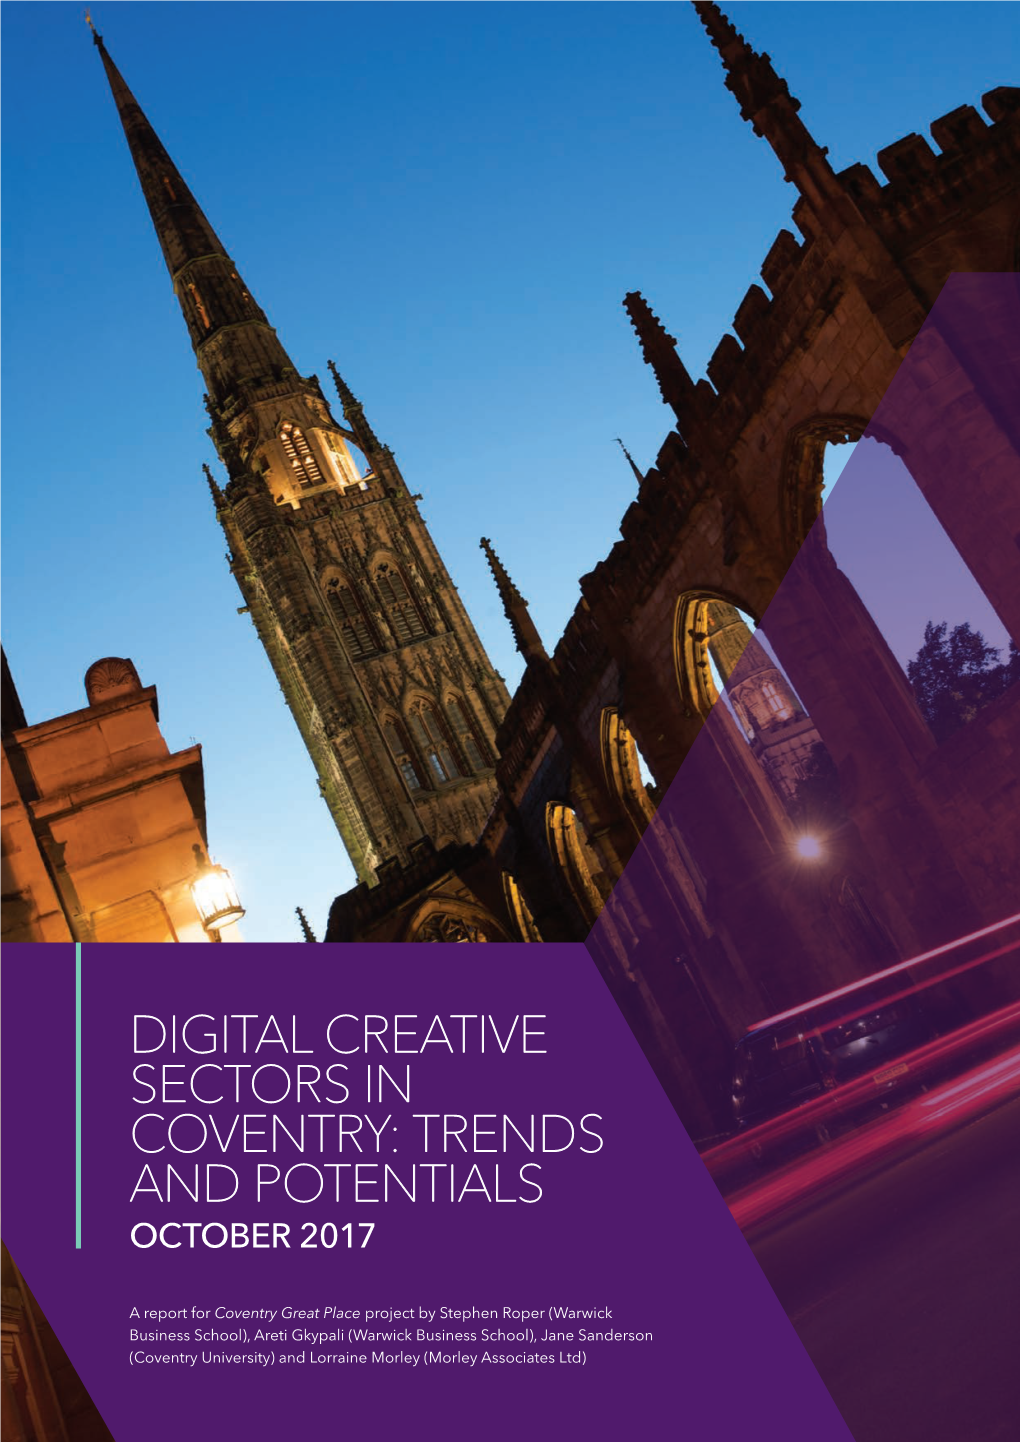 Digital Creative Sectors in Coventry: Trends and Potentials October 2017